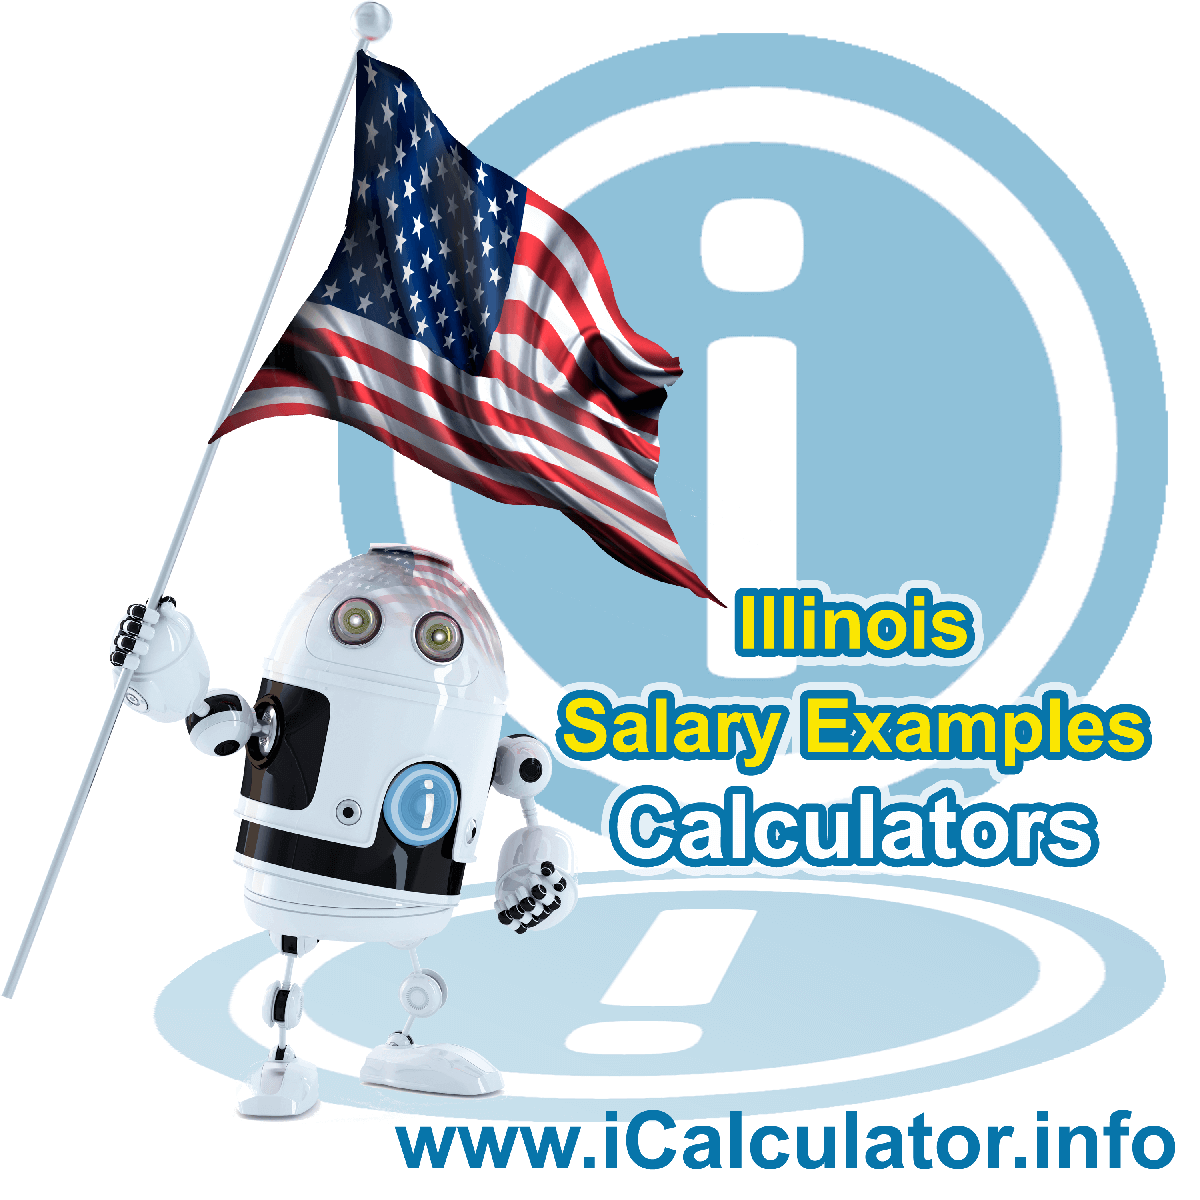 Illinois Salary Example for $ 70,000.00 in 2023 | iCalculator™ | $ 70,000.00 salary example for employee and employer paying Illinois State tincome taxes. Detailed salary after tax calculation including Illinois State Tax, Federal State Tax, Medicare Deductions, Social Security, Capital Gains and other income tax and salary deductions complete with supporting Illinois state tax tables 